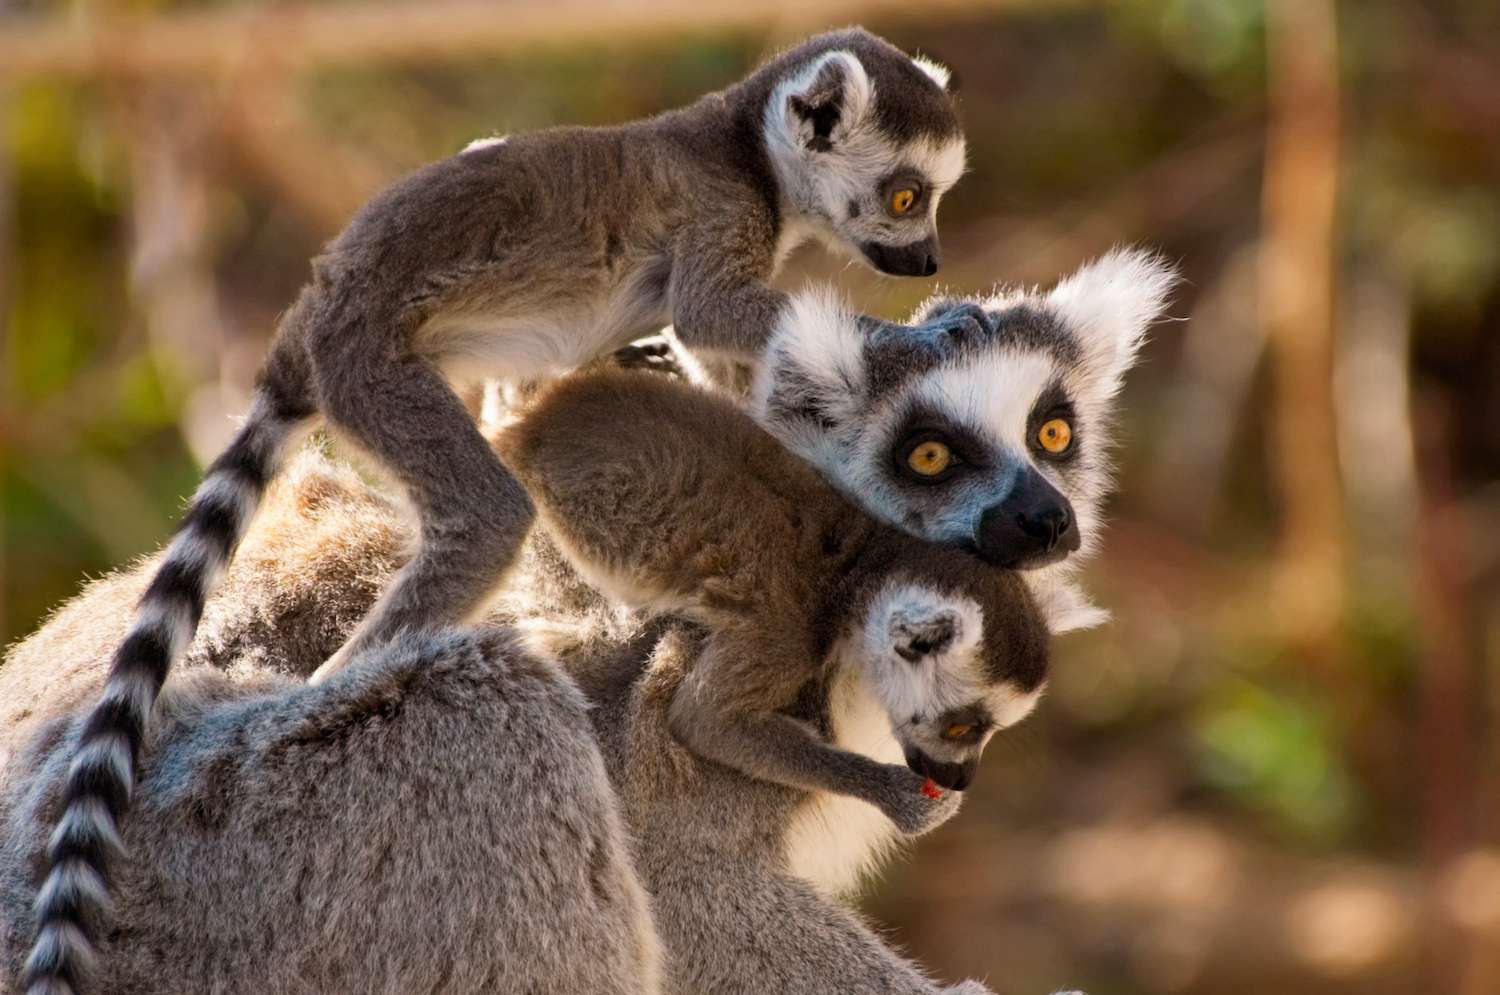 A goup of cute ring-tailed lemurs with the baby monkeys on mothers back